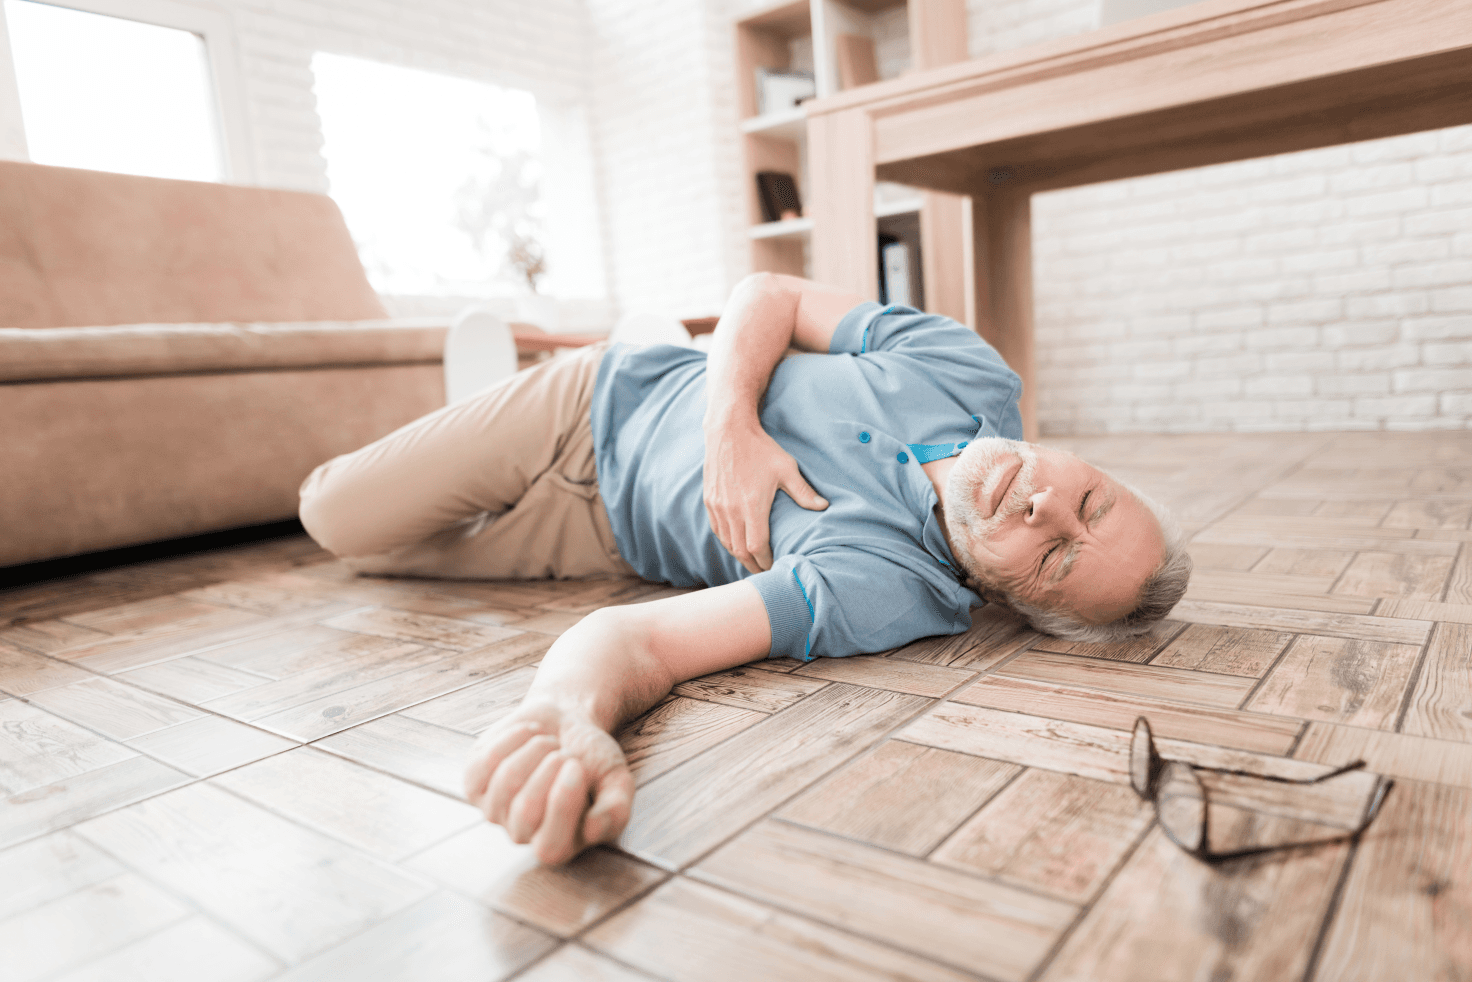 Seizure: Meaning, Early Symptoms, Causes, and Treatment